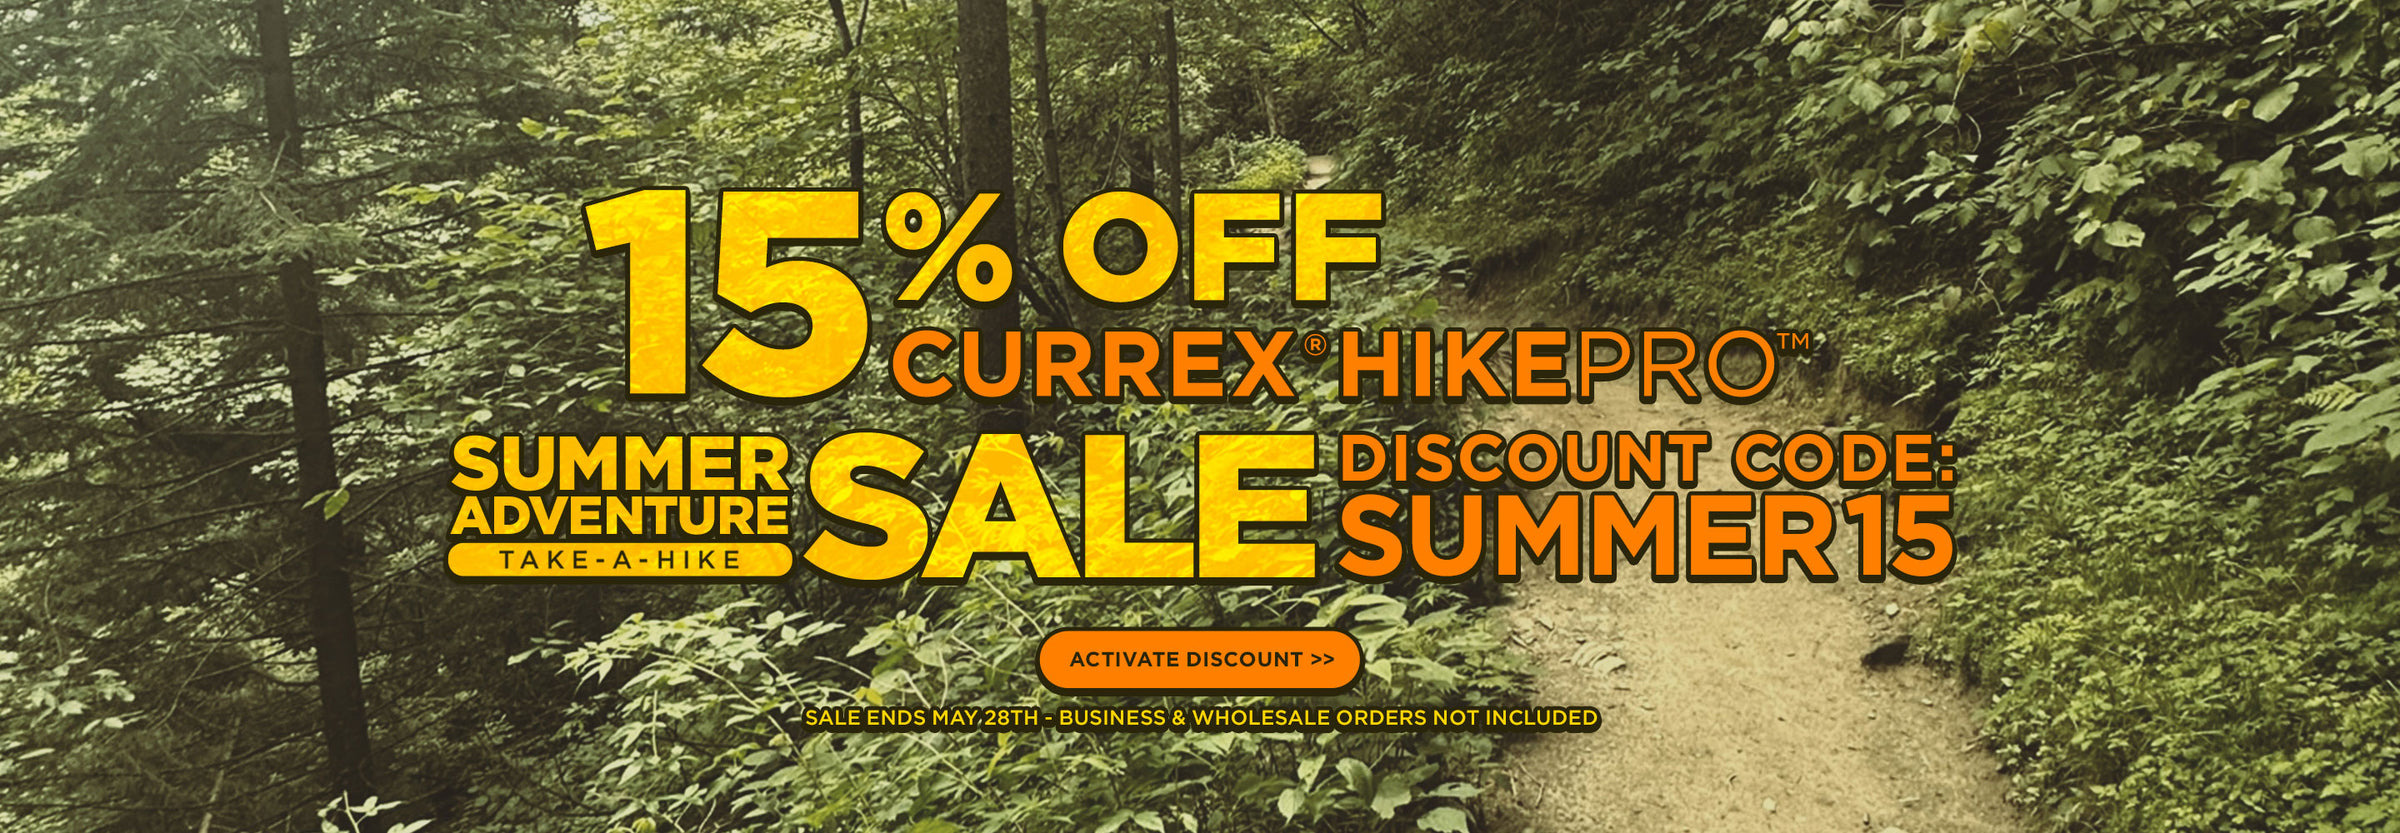 15% off CURREX HIKEPRO insoles. Summer adventure take-a-hike sale. Discount code: SUMMER15. Activate discount. Sale ends May 28th - business and wholesale orders not included.